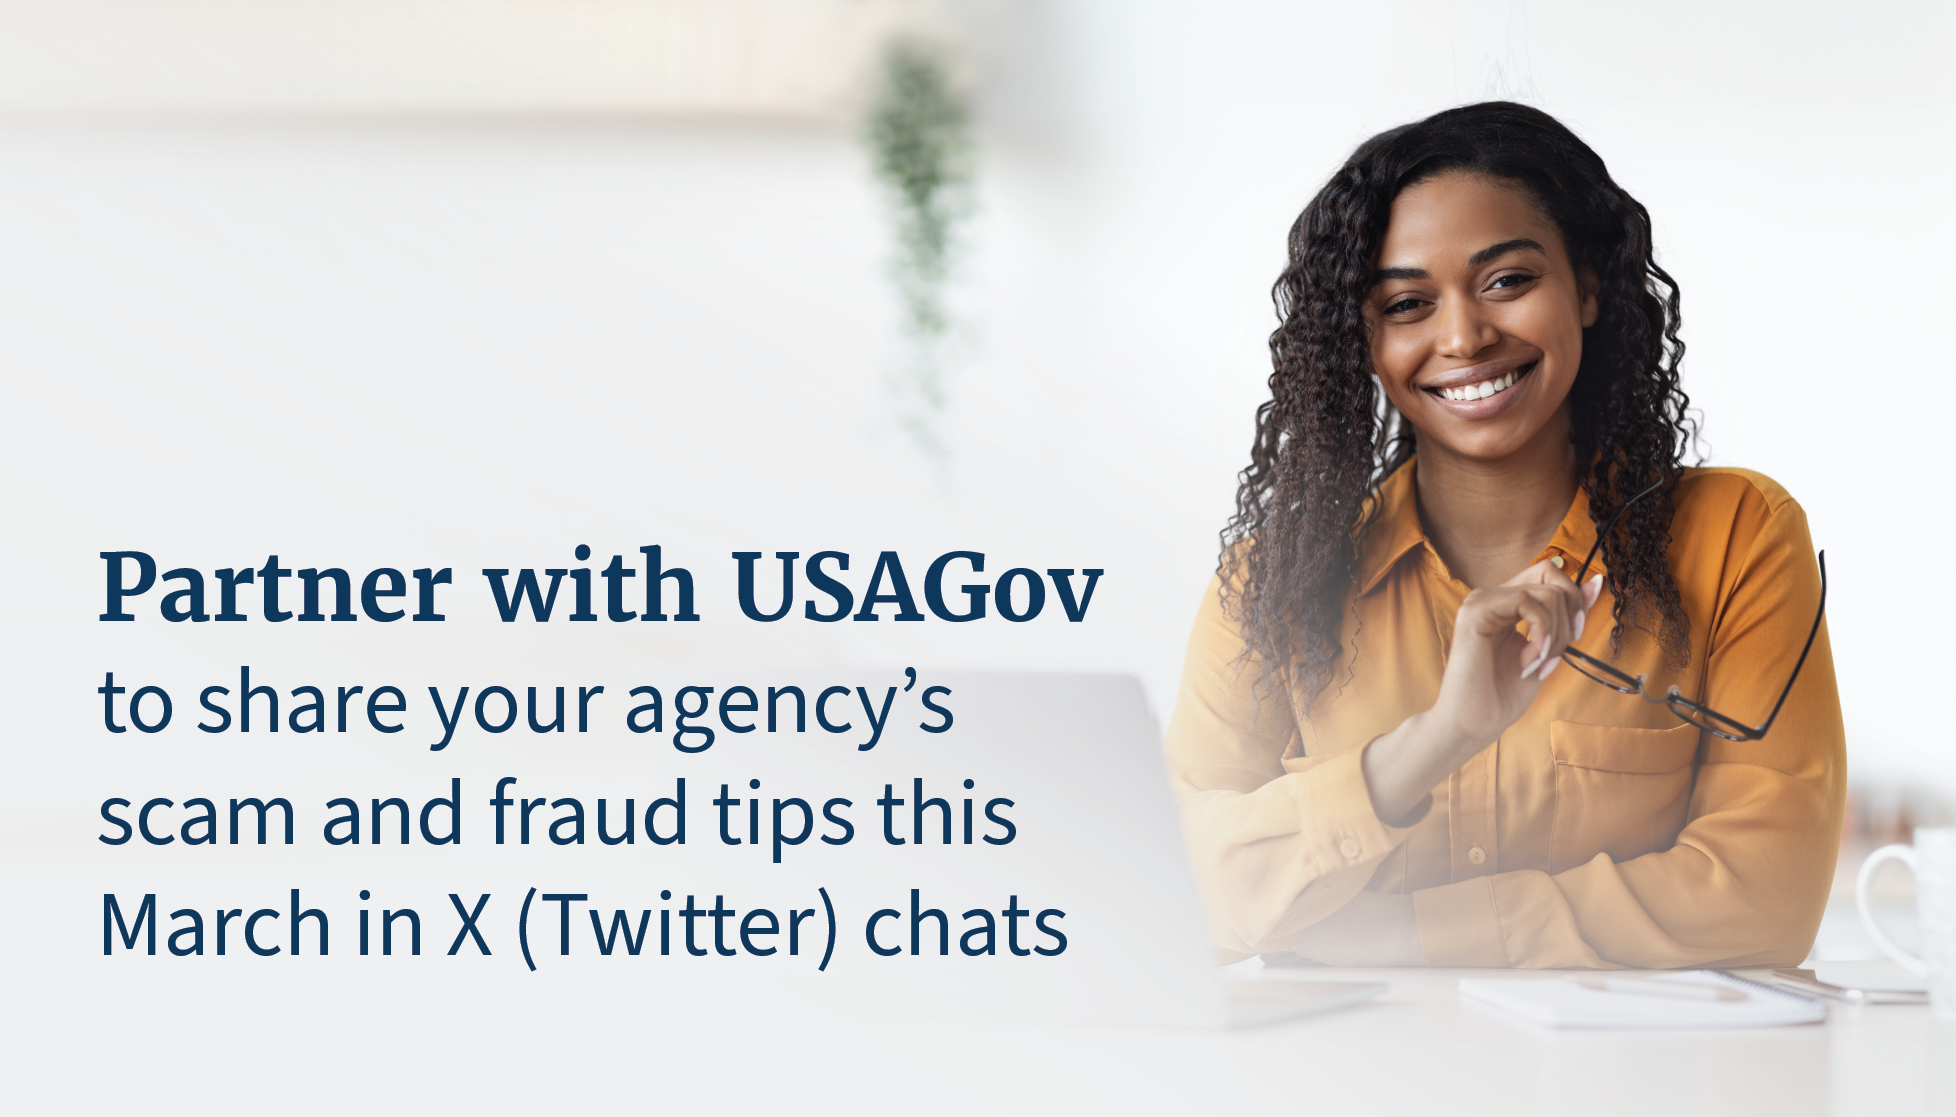 The text "Partner with USAGov to share your agency’s scam and fraud tips this March in X (Twitter) chats" next to a smiling Black woman on a laptop  